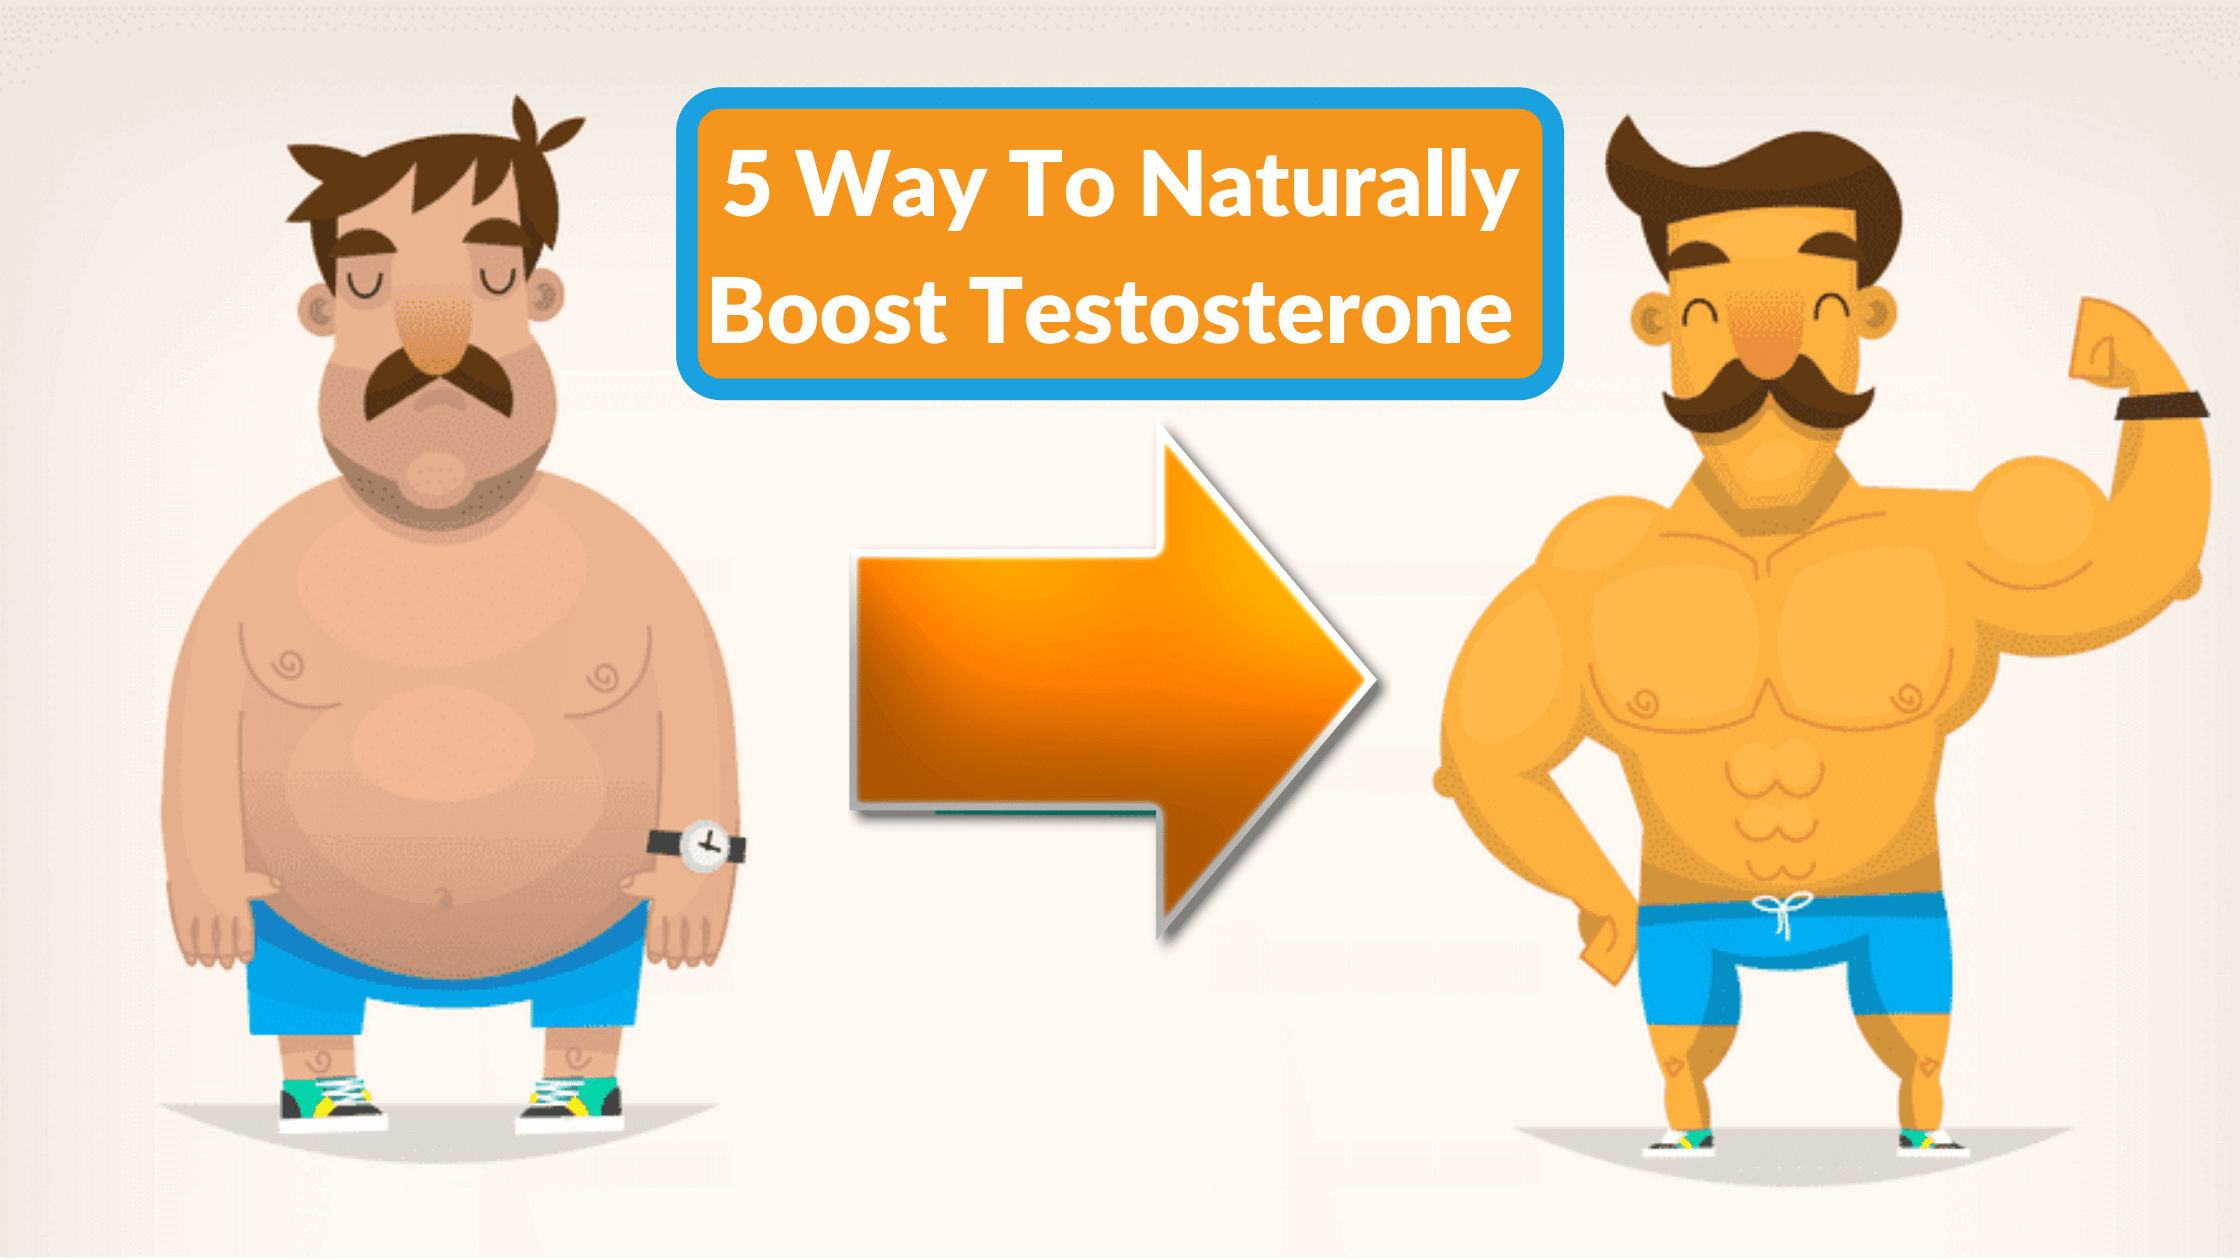 5 ways to boost testosterone naturally